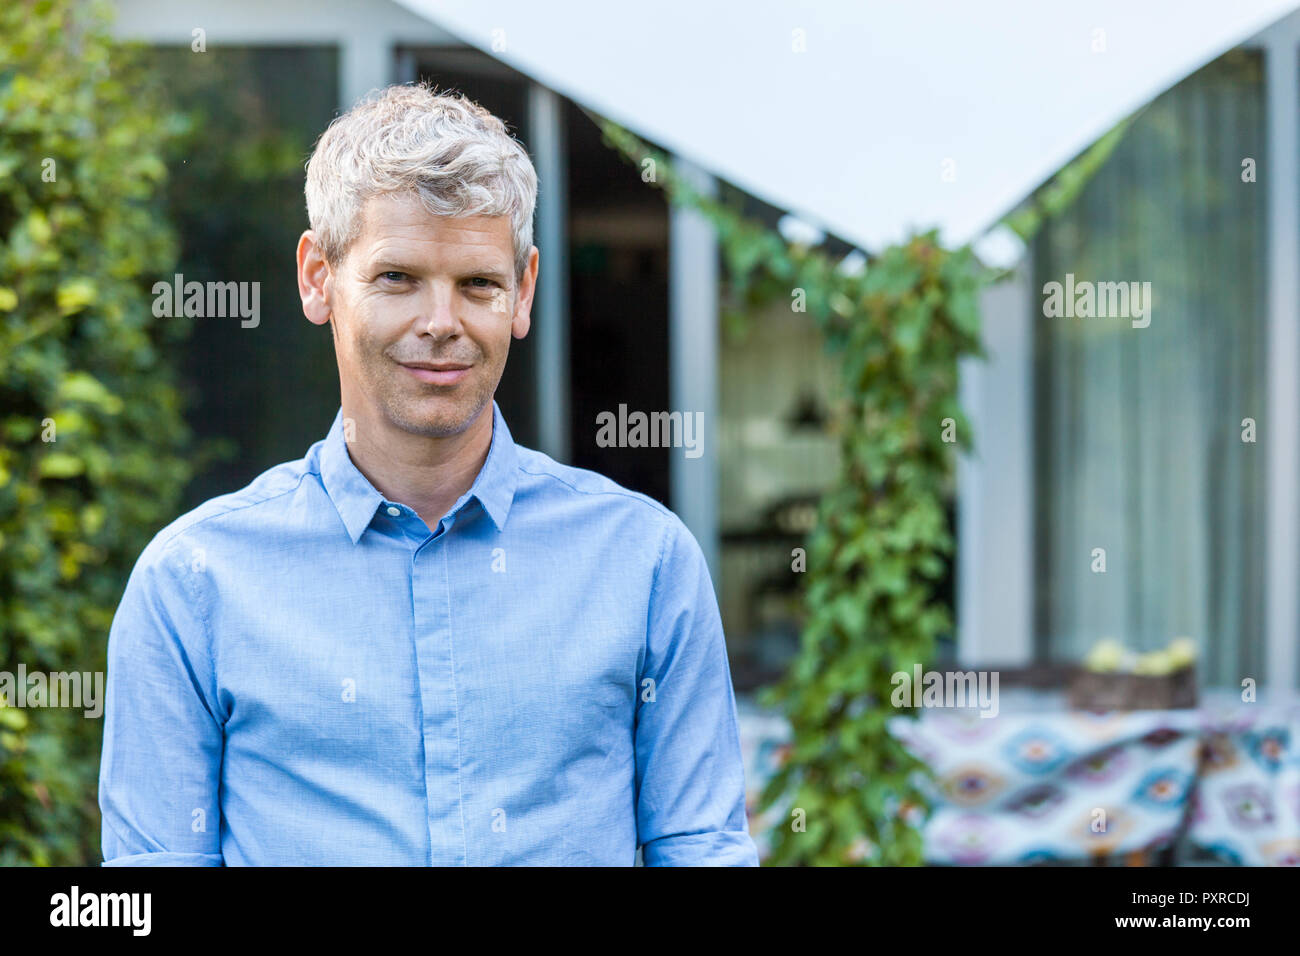 Portrait of content mature man with grey hair in front of his house Stock Photo